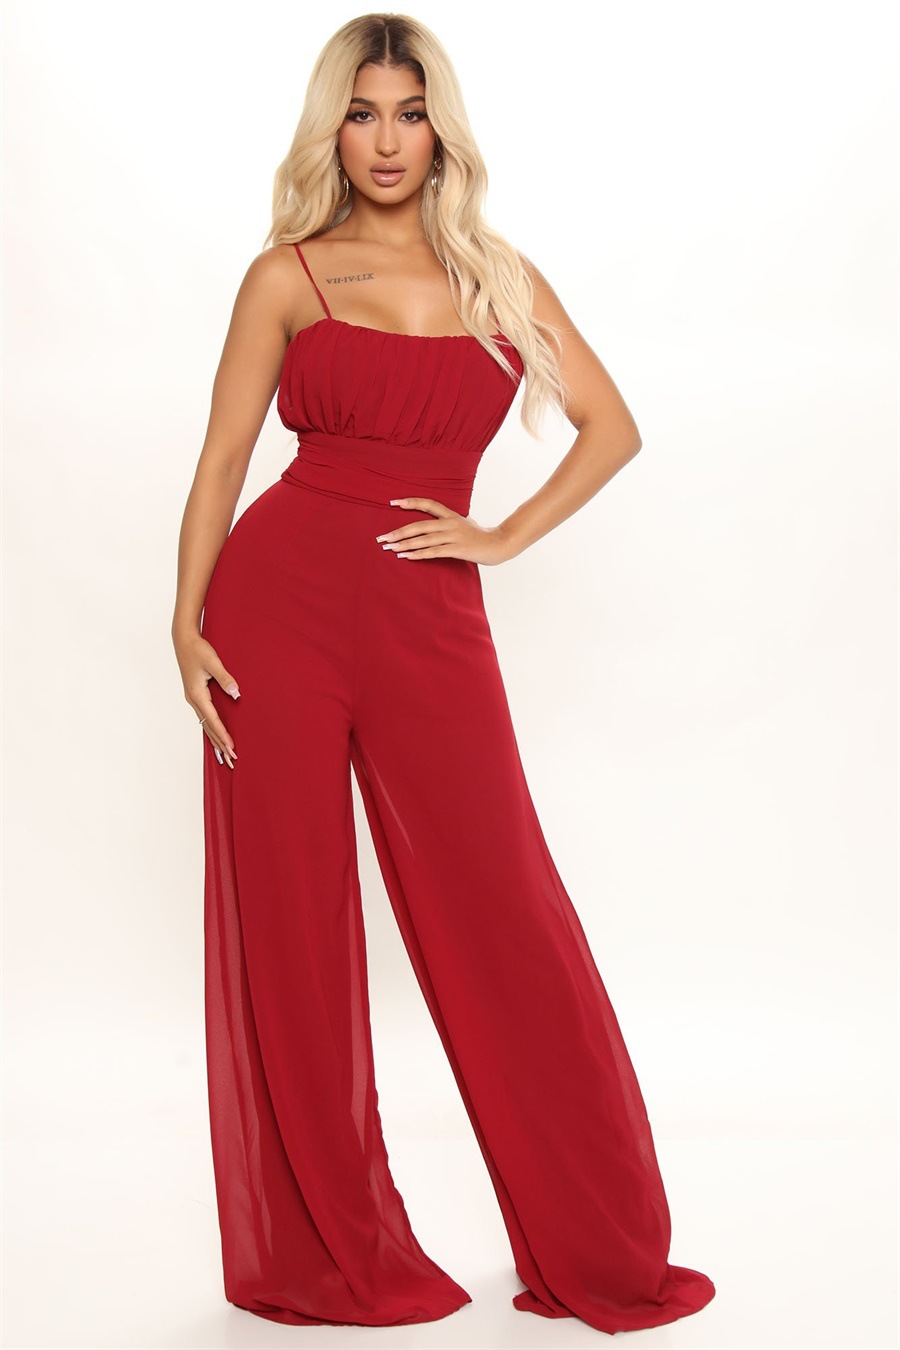 Sling backless lace-up wide-leg Solid Color Chiffon Jumpsuit NSXLY119204